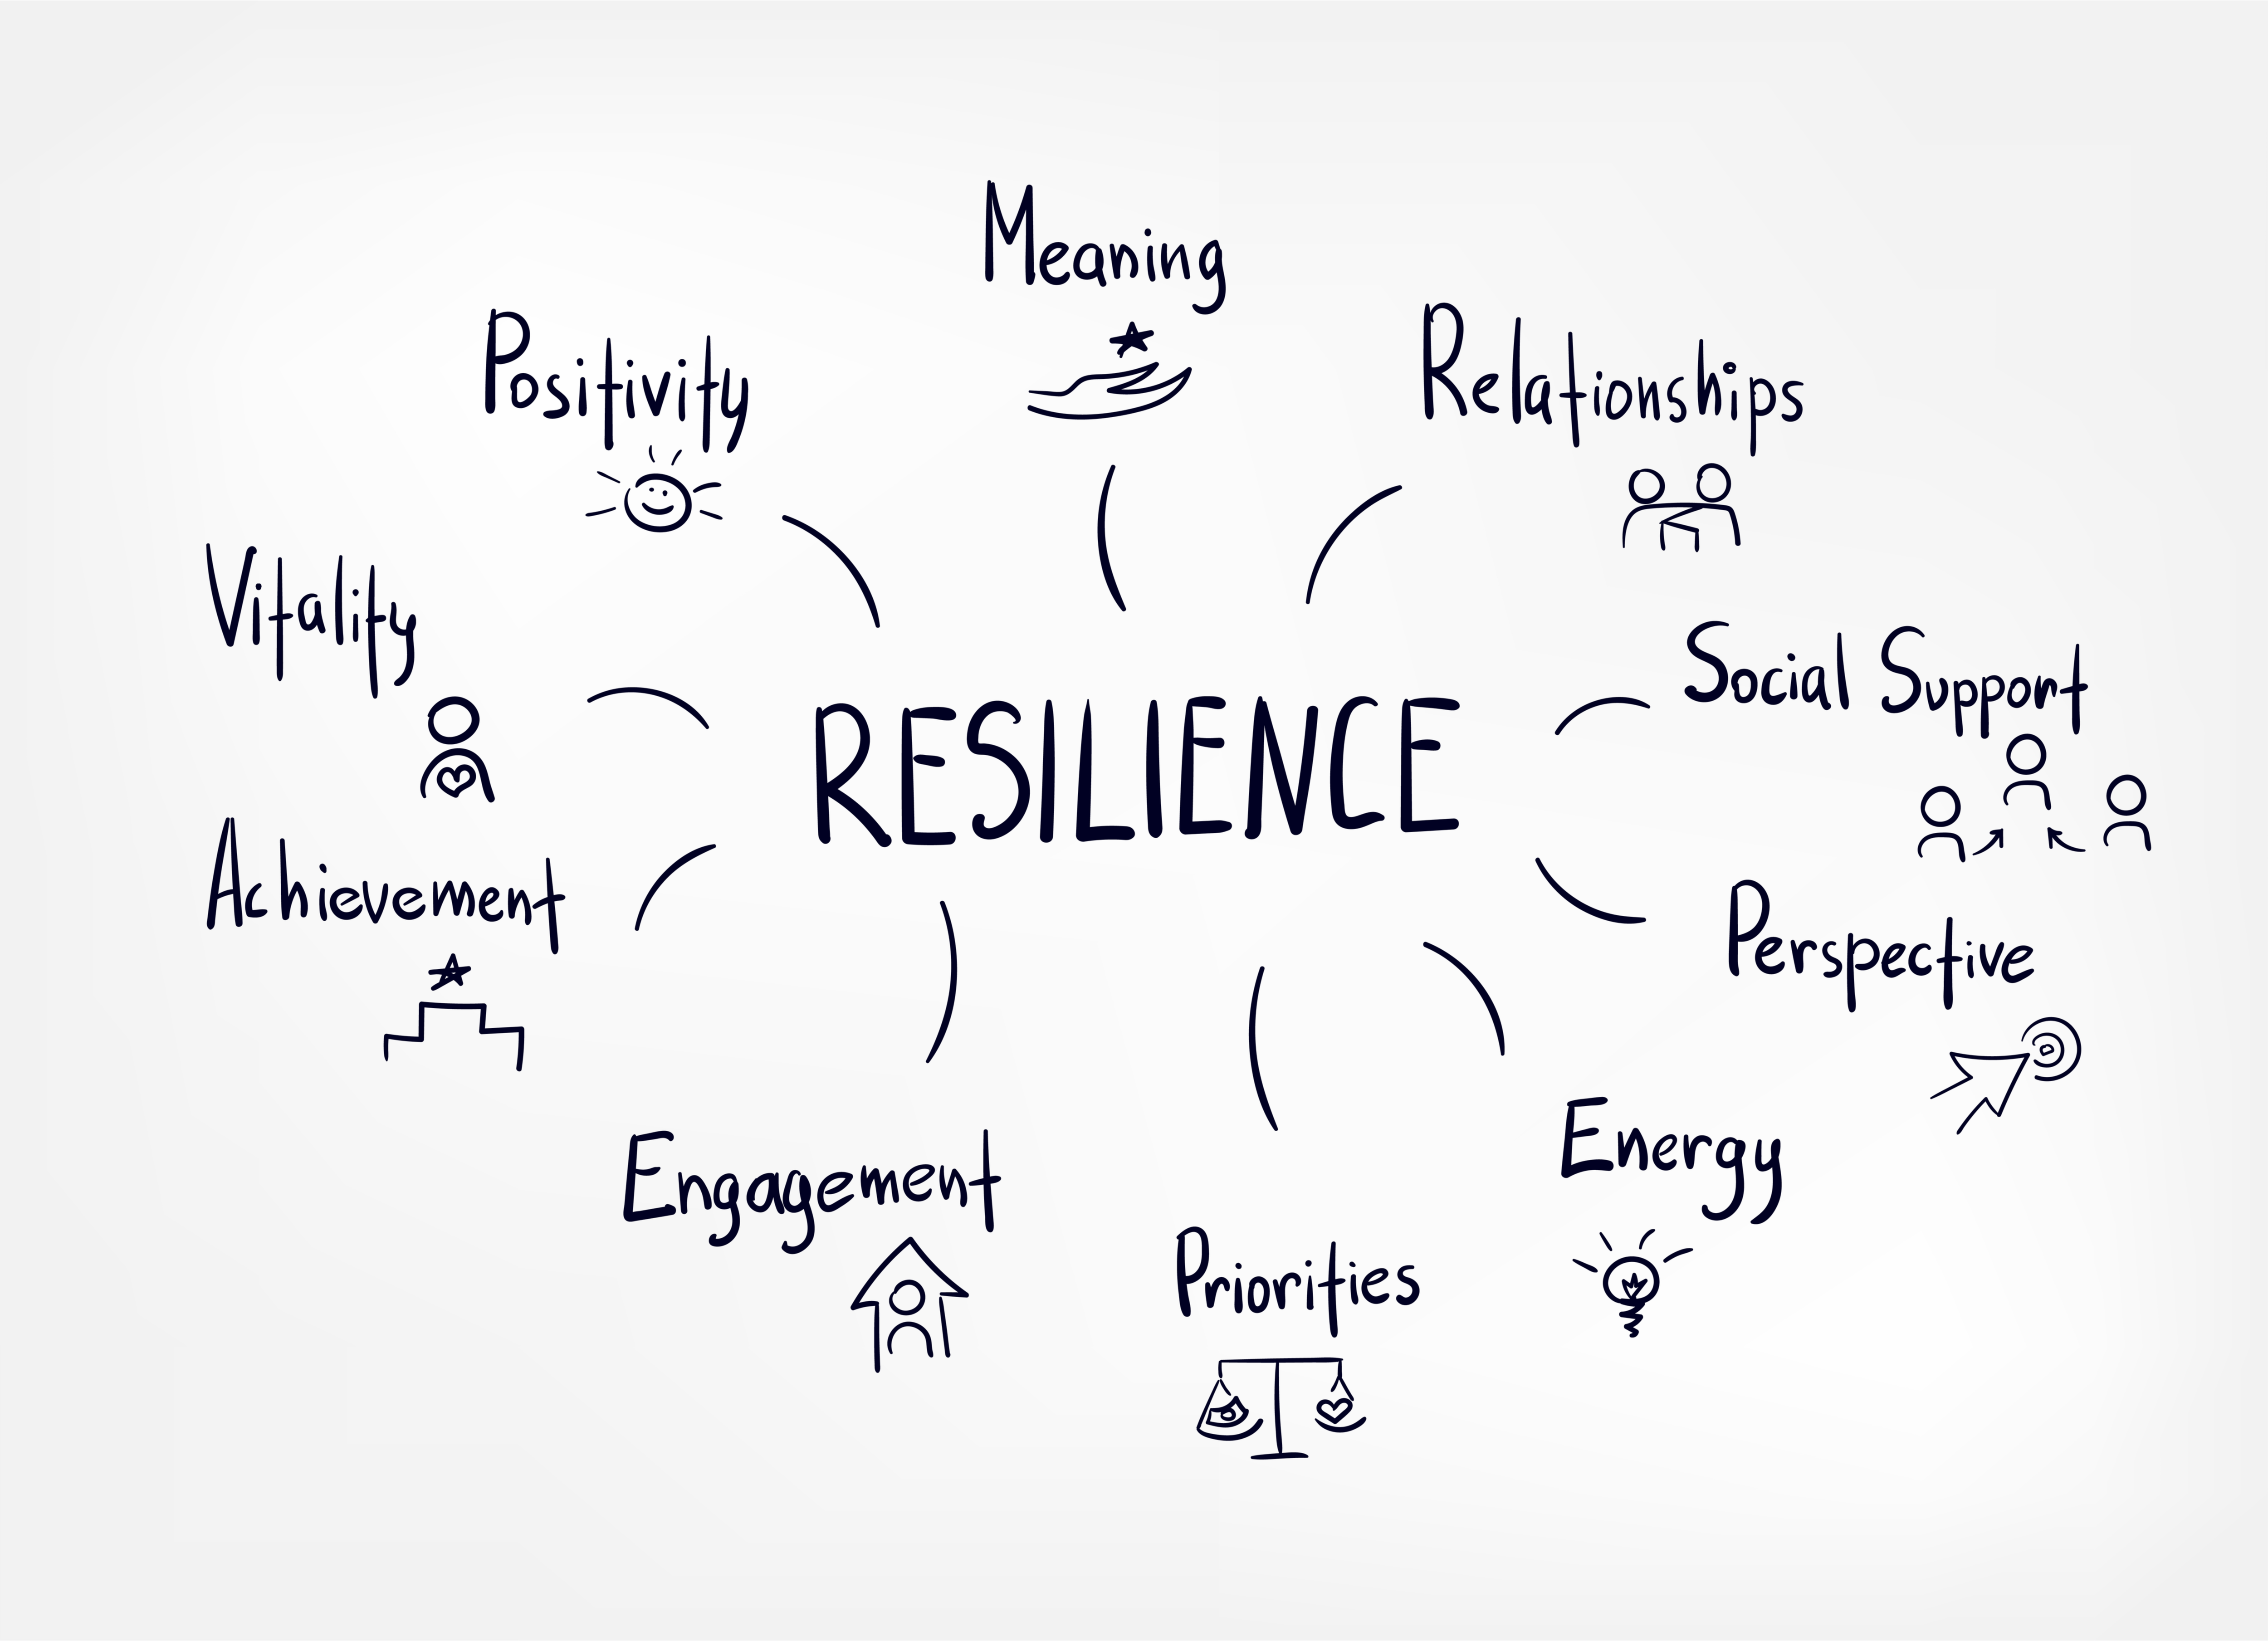 Resilience Reset event image has the word "Resilience" written in the center, with words written around it. These words are: relationships, meaning, positivity, energy, perspective, engagement, vitality, social support, and achievement.